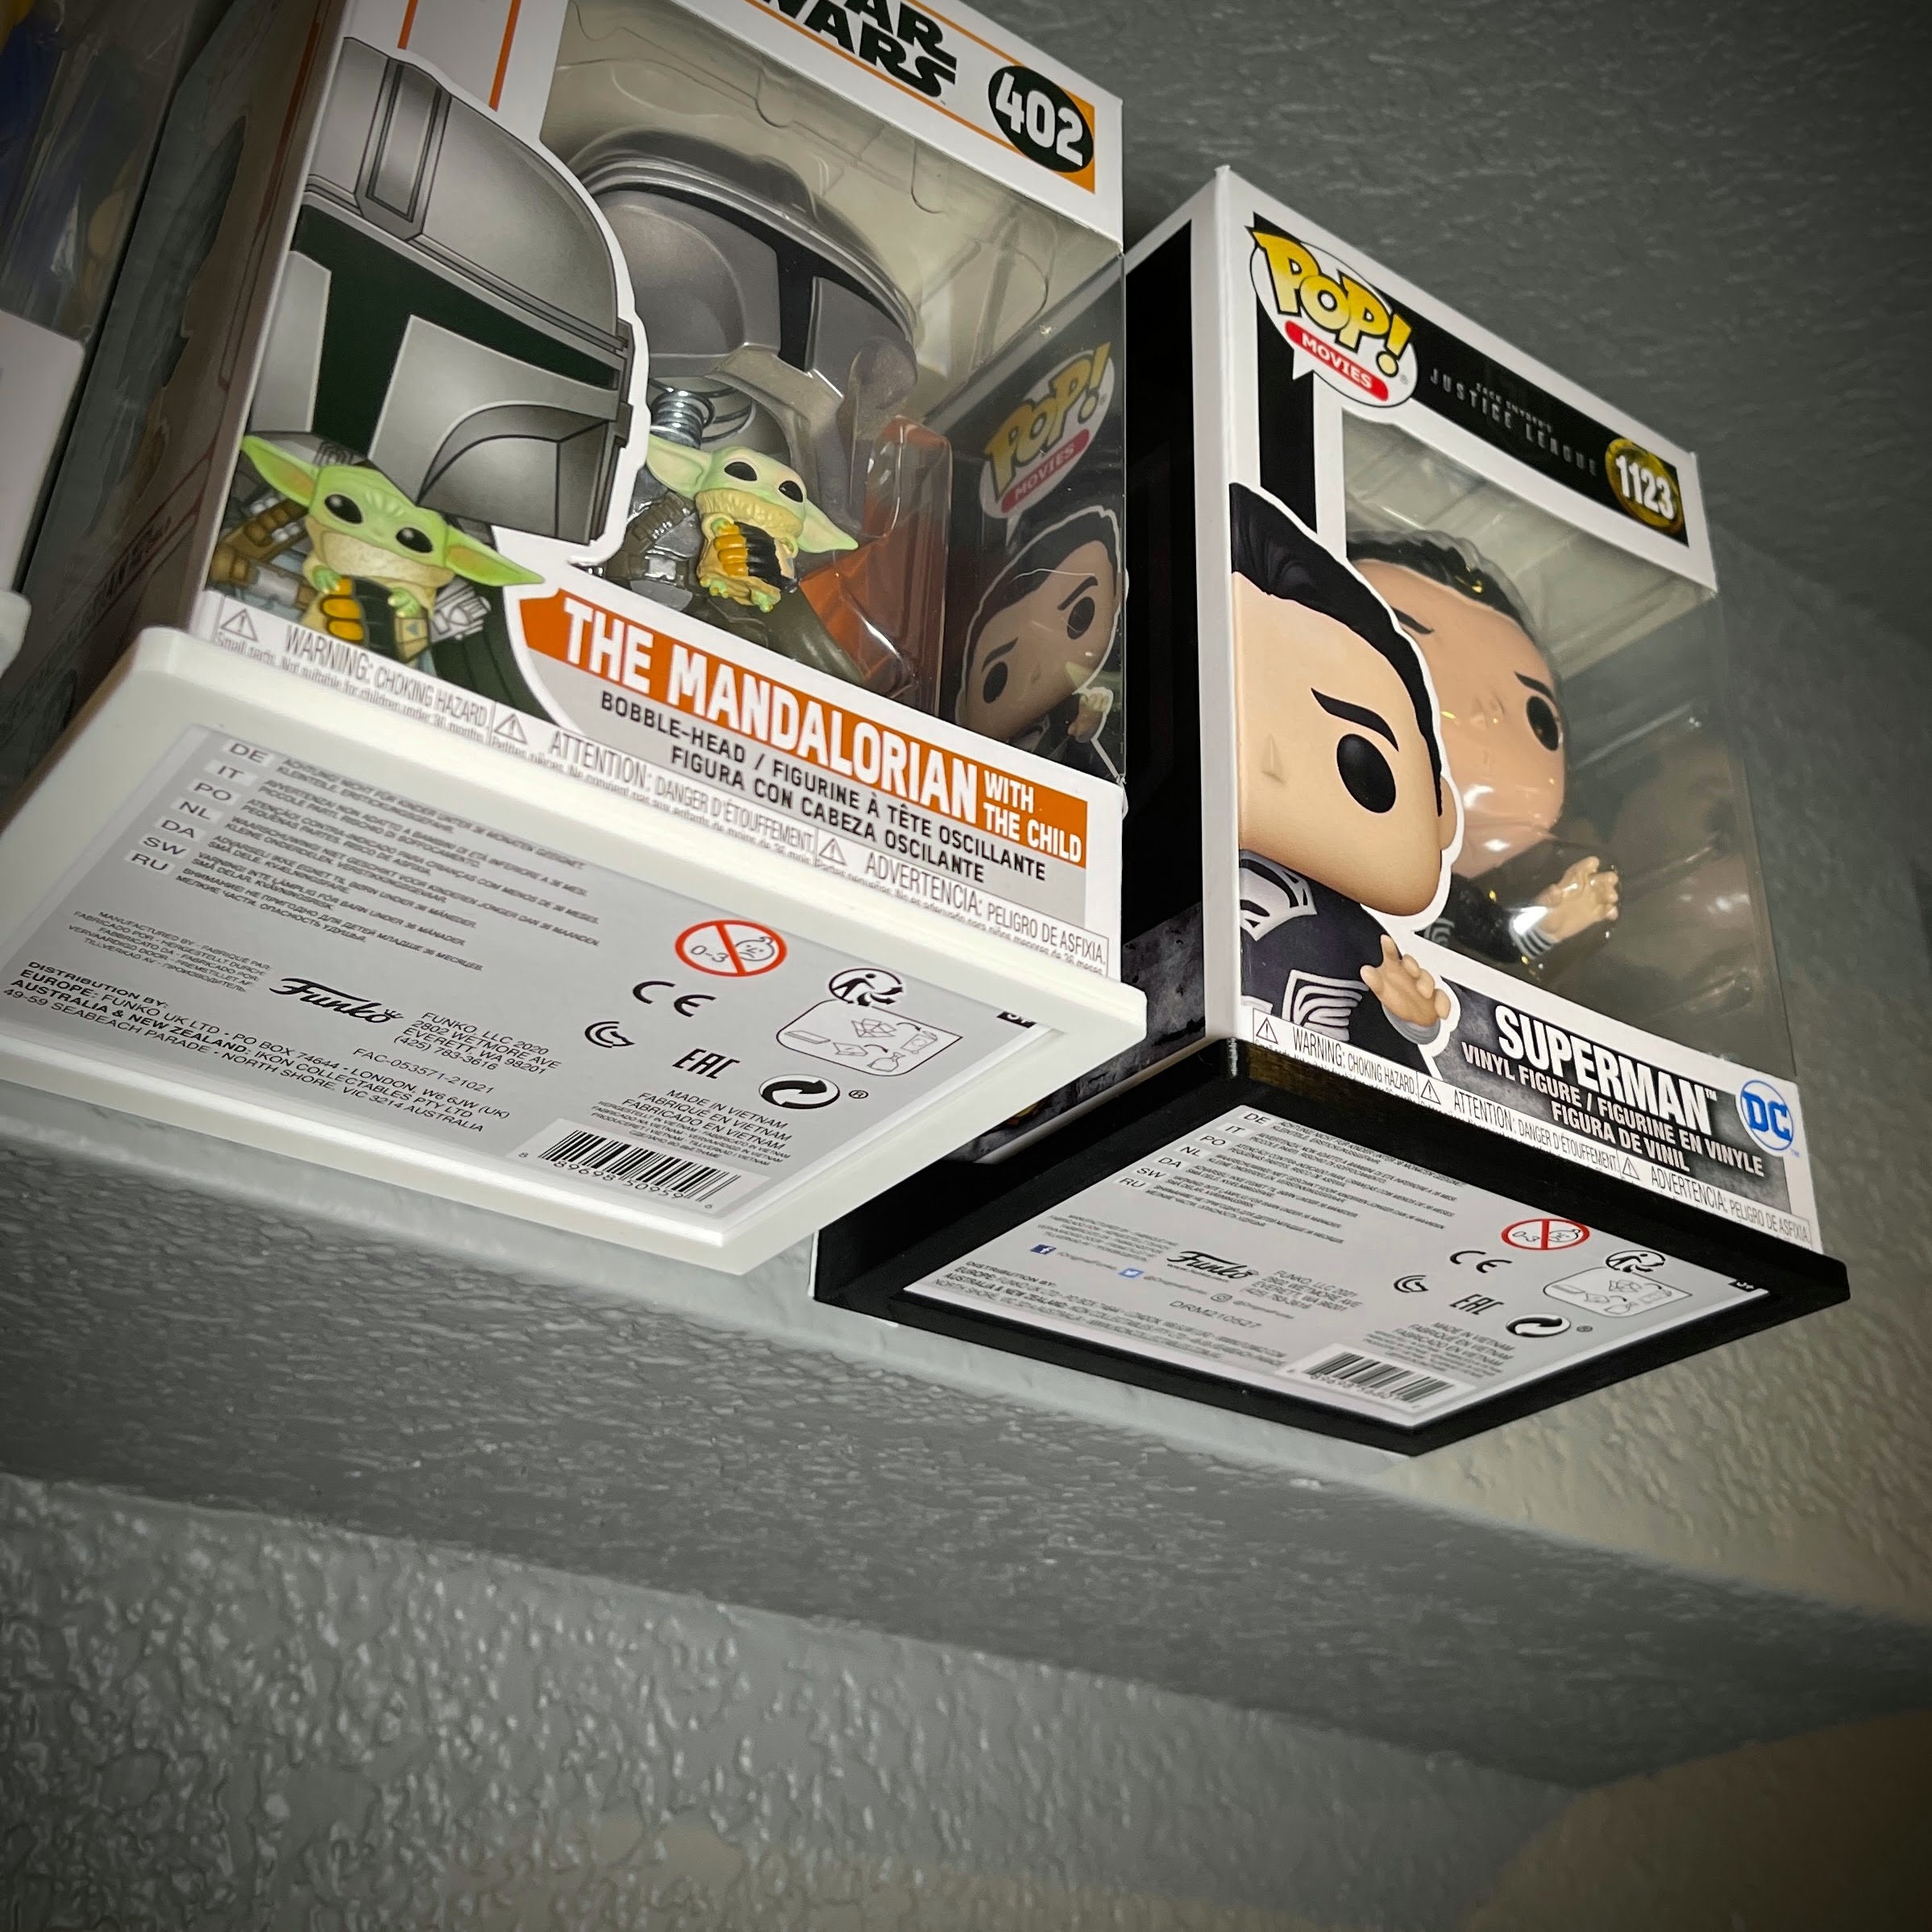 Command strip-mounted Pop Box Floating Shelves | Fits Soft Cases or Funko  Pop Box only | Strips included